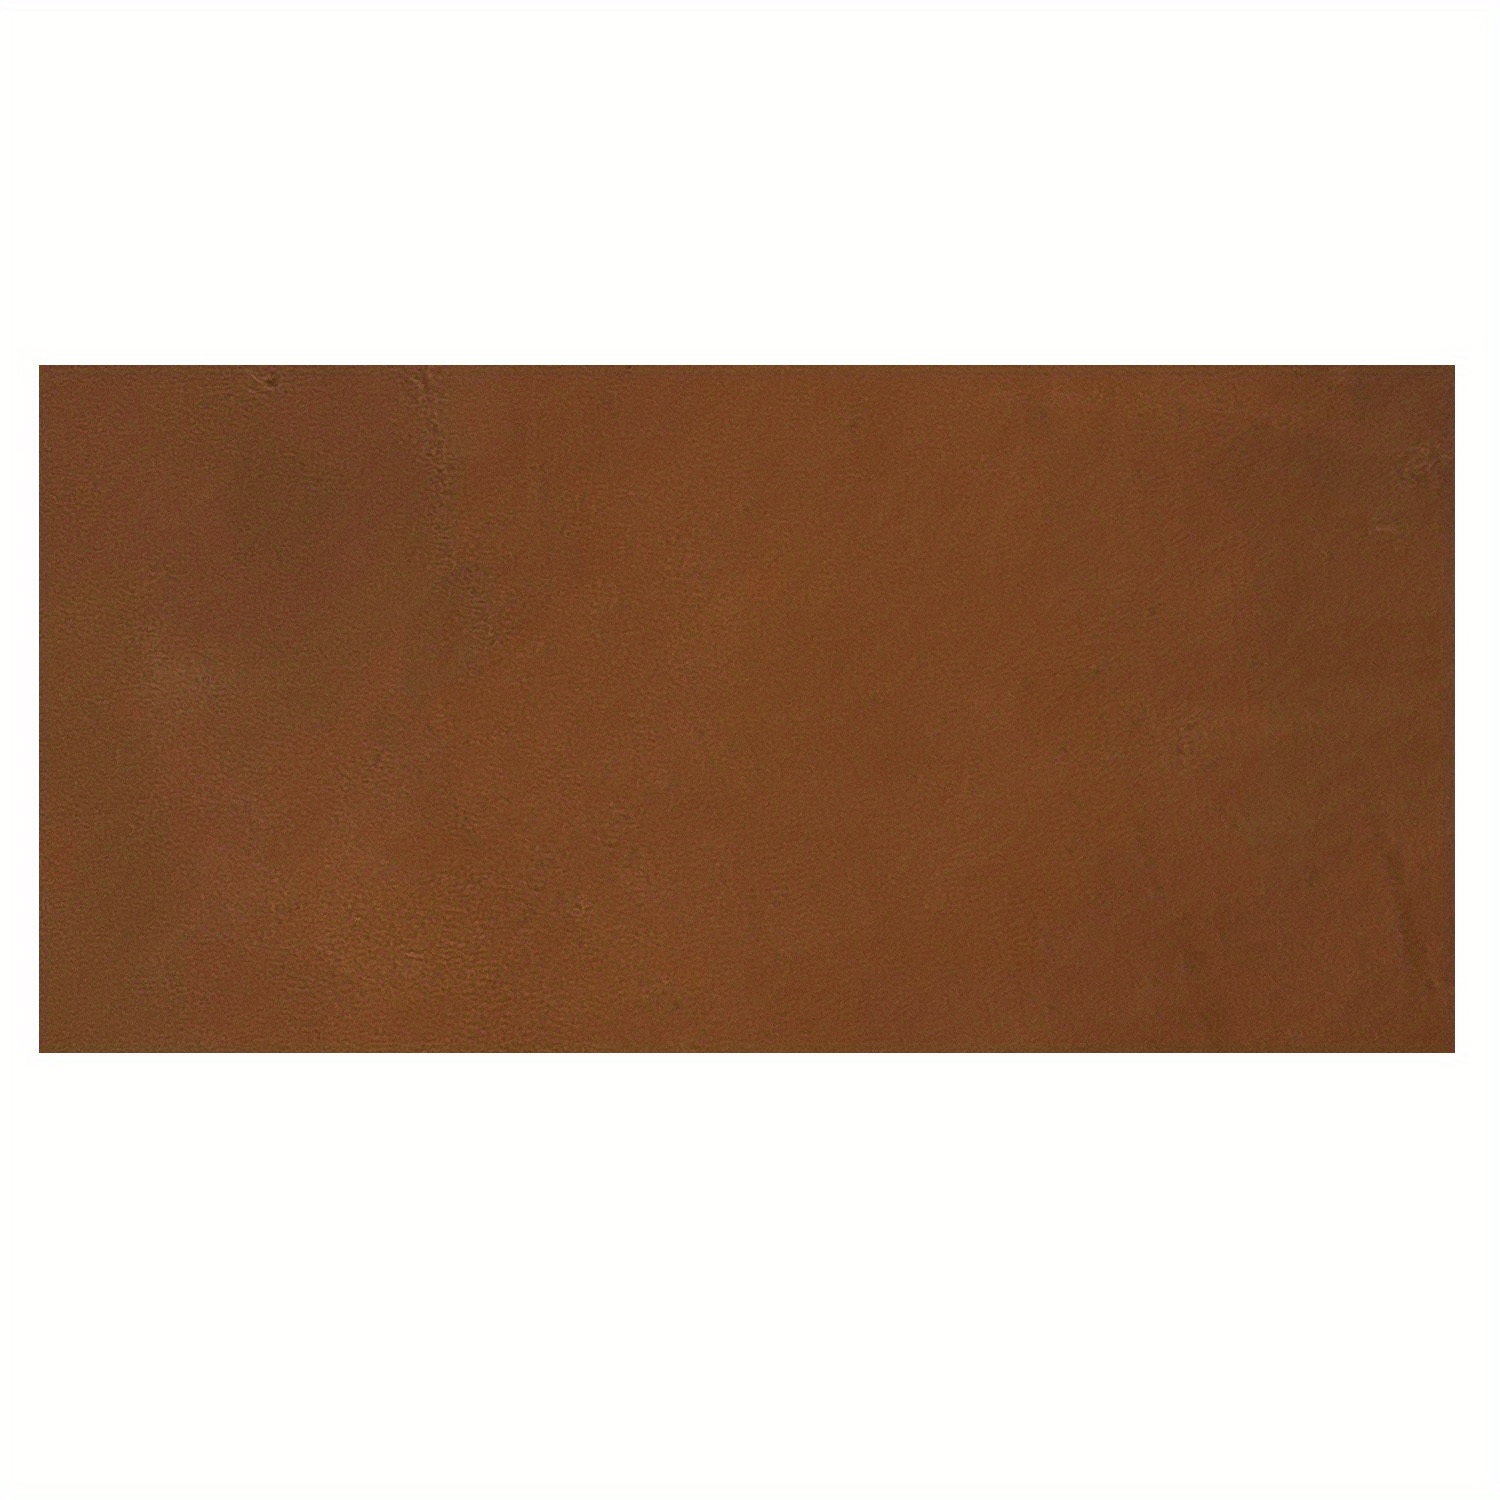 Tooling Leather Square 1.8-2.0MM Thick Genuine Top Full Grain Oil Tan Crazy  Horse Cowhide Leather Sh…See more Tooling Leather Square 1.8-2.0MM Thick